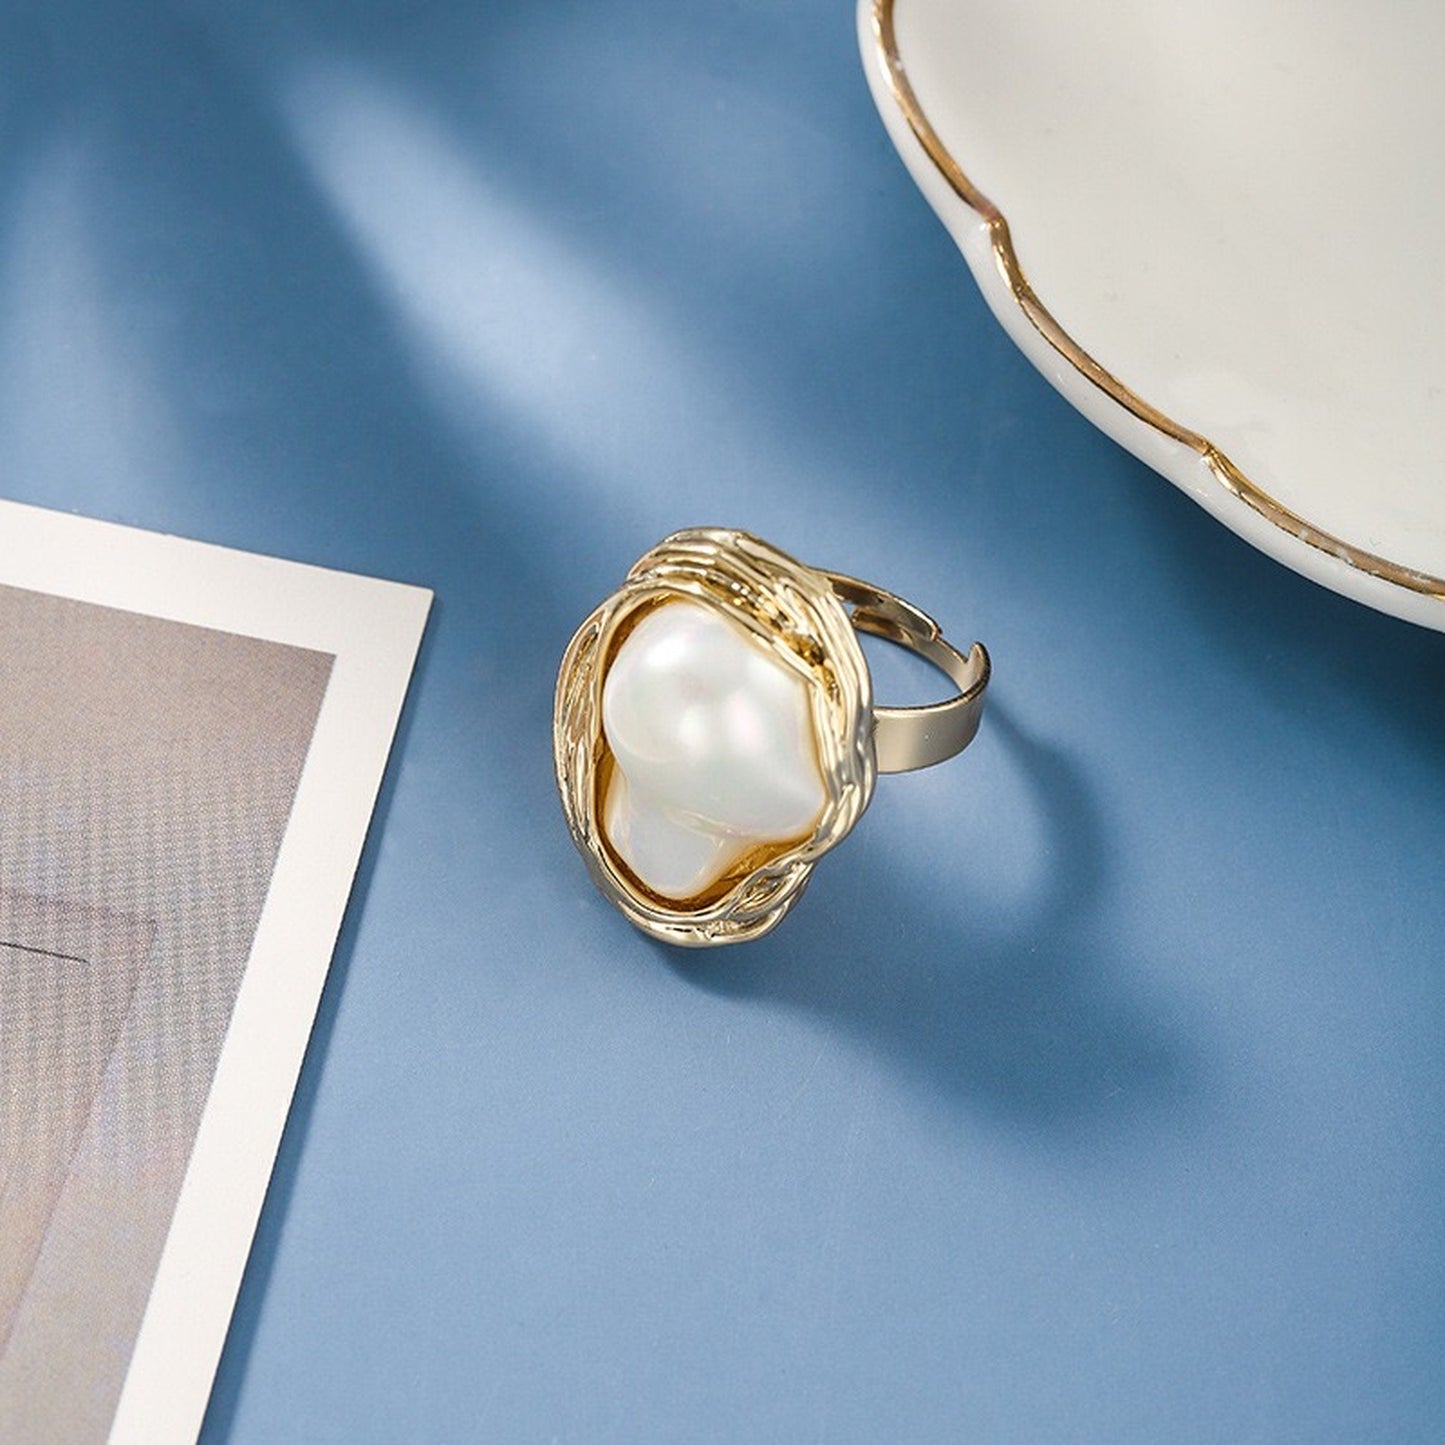 Baroque Pearl Statement Ring, Chunky Rings, Oval Gemstone Ring, Handmade Vintage Gold Ring, Open Stackable Large Cocktail Ring, Gift for Her